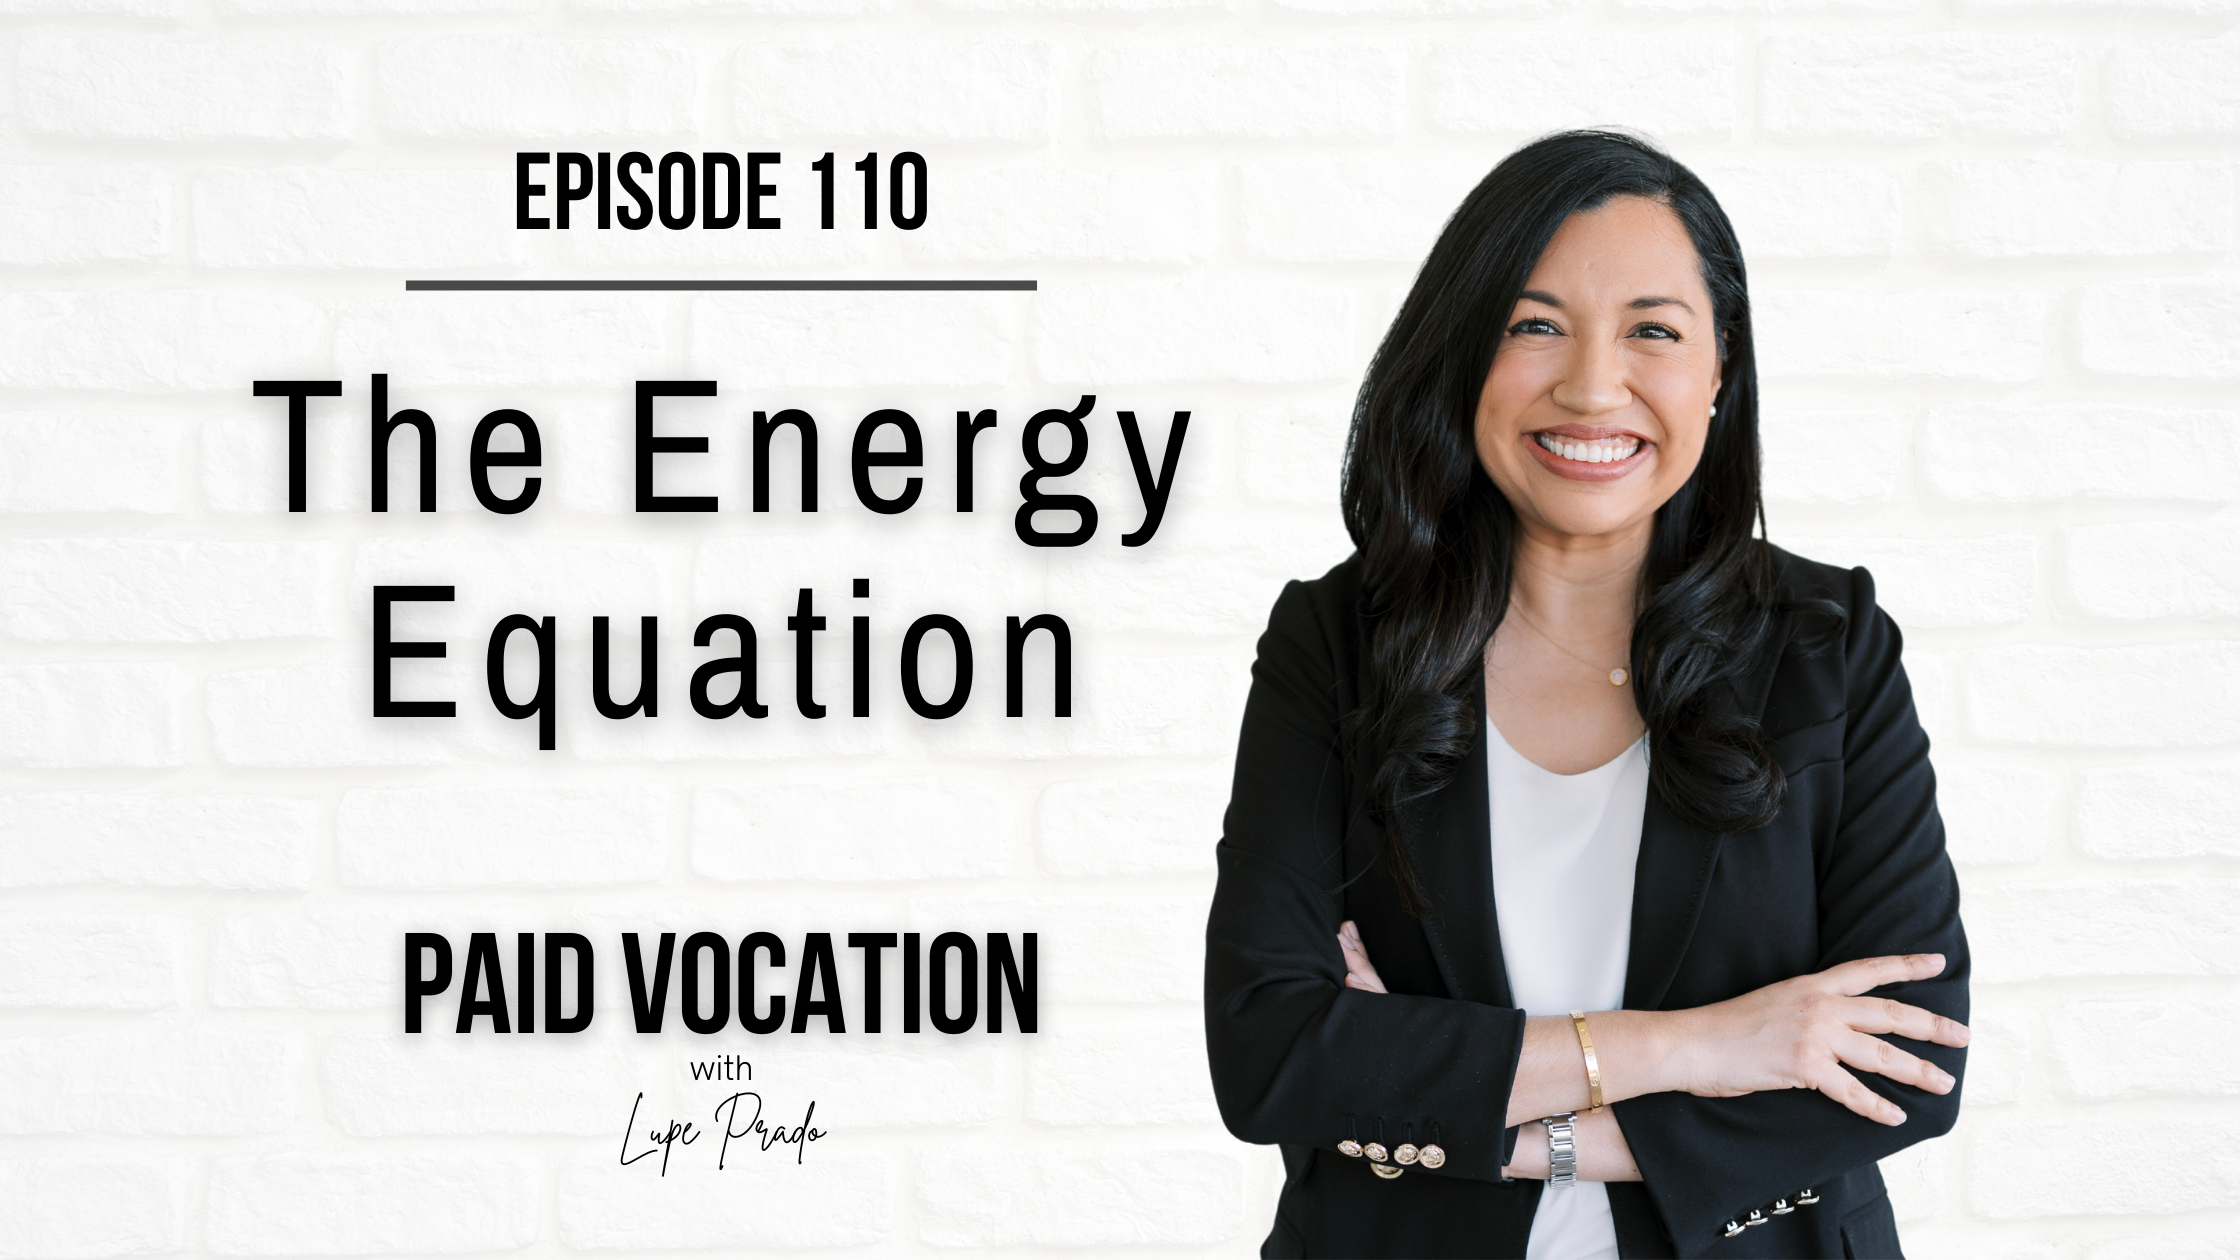 Solo Episode: The Energy Equation